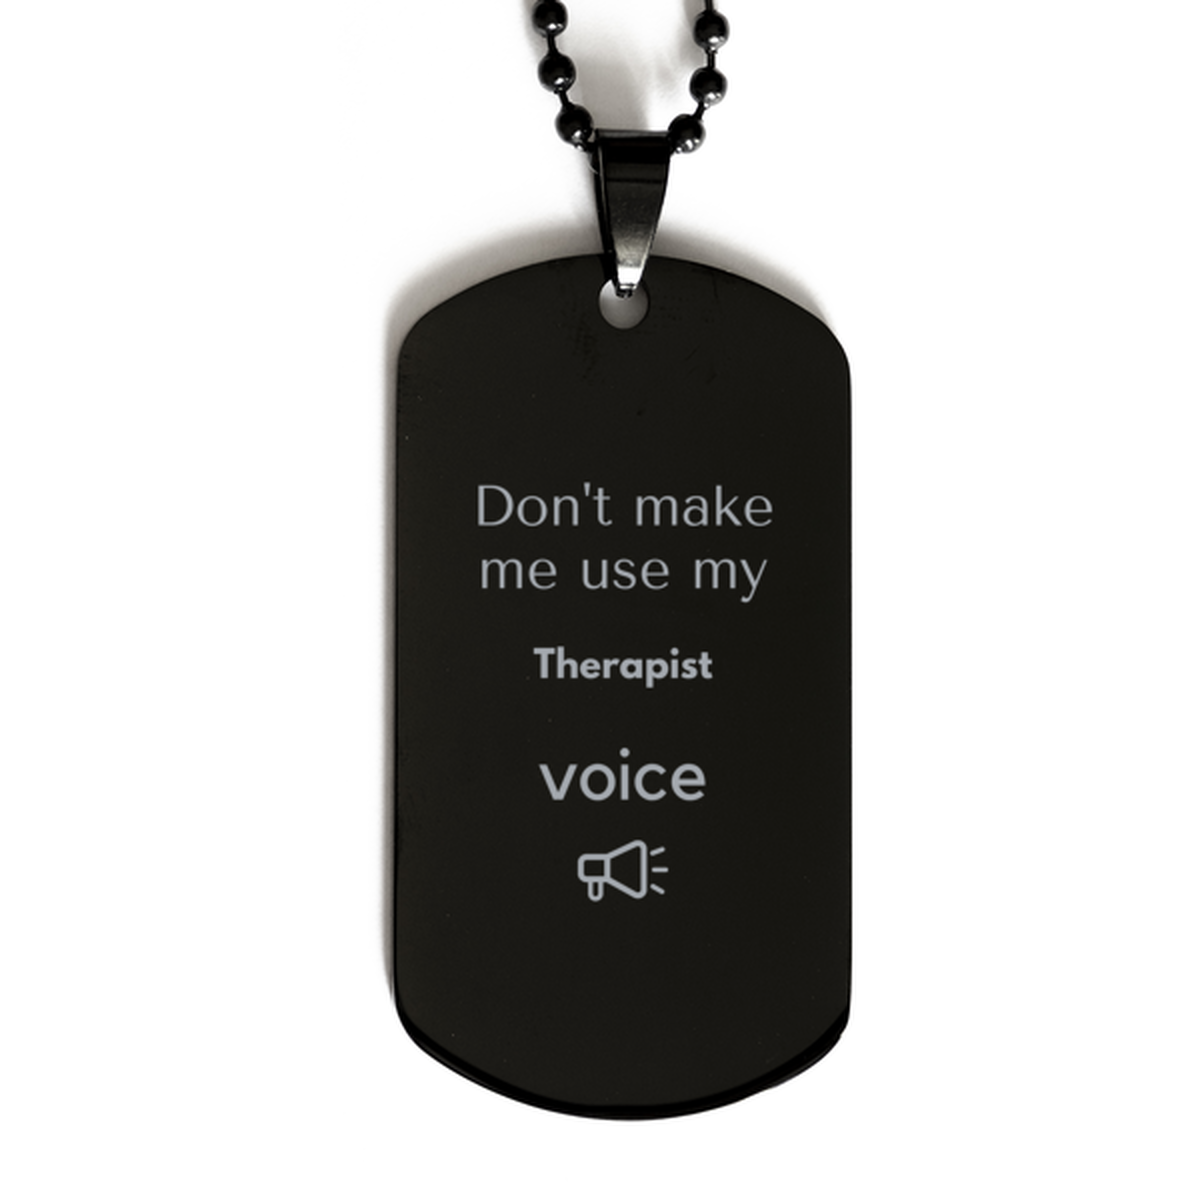 Don't make me use my Therapist voice, Sarcasm Therapist Gifts, Christmas Therapist Black Dog Tag Birthday Unique Gifts For Therapist Coworkers, Men, Women, Colleague, Friends